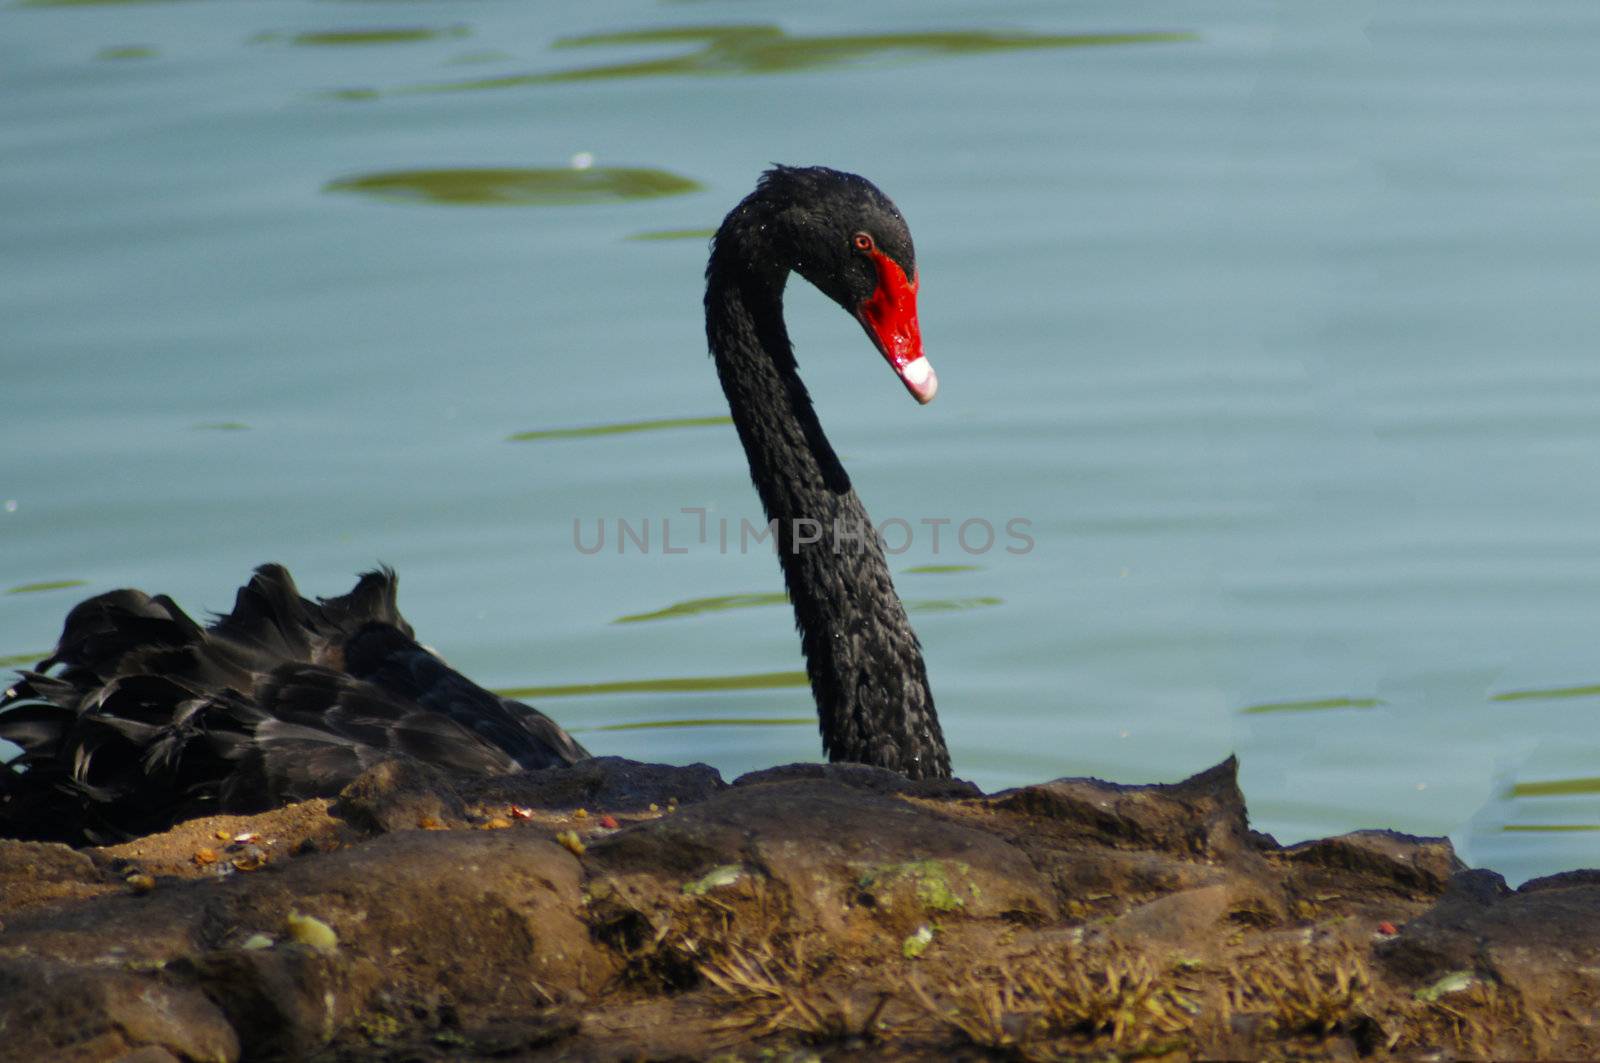 With one year of age get their adult coloring, and its neck fully black contrasts beautifully with the red base of its beak and body entirely black